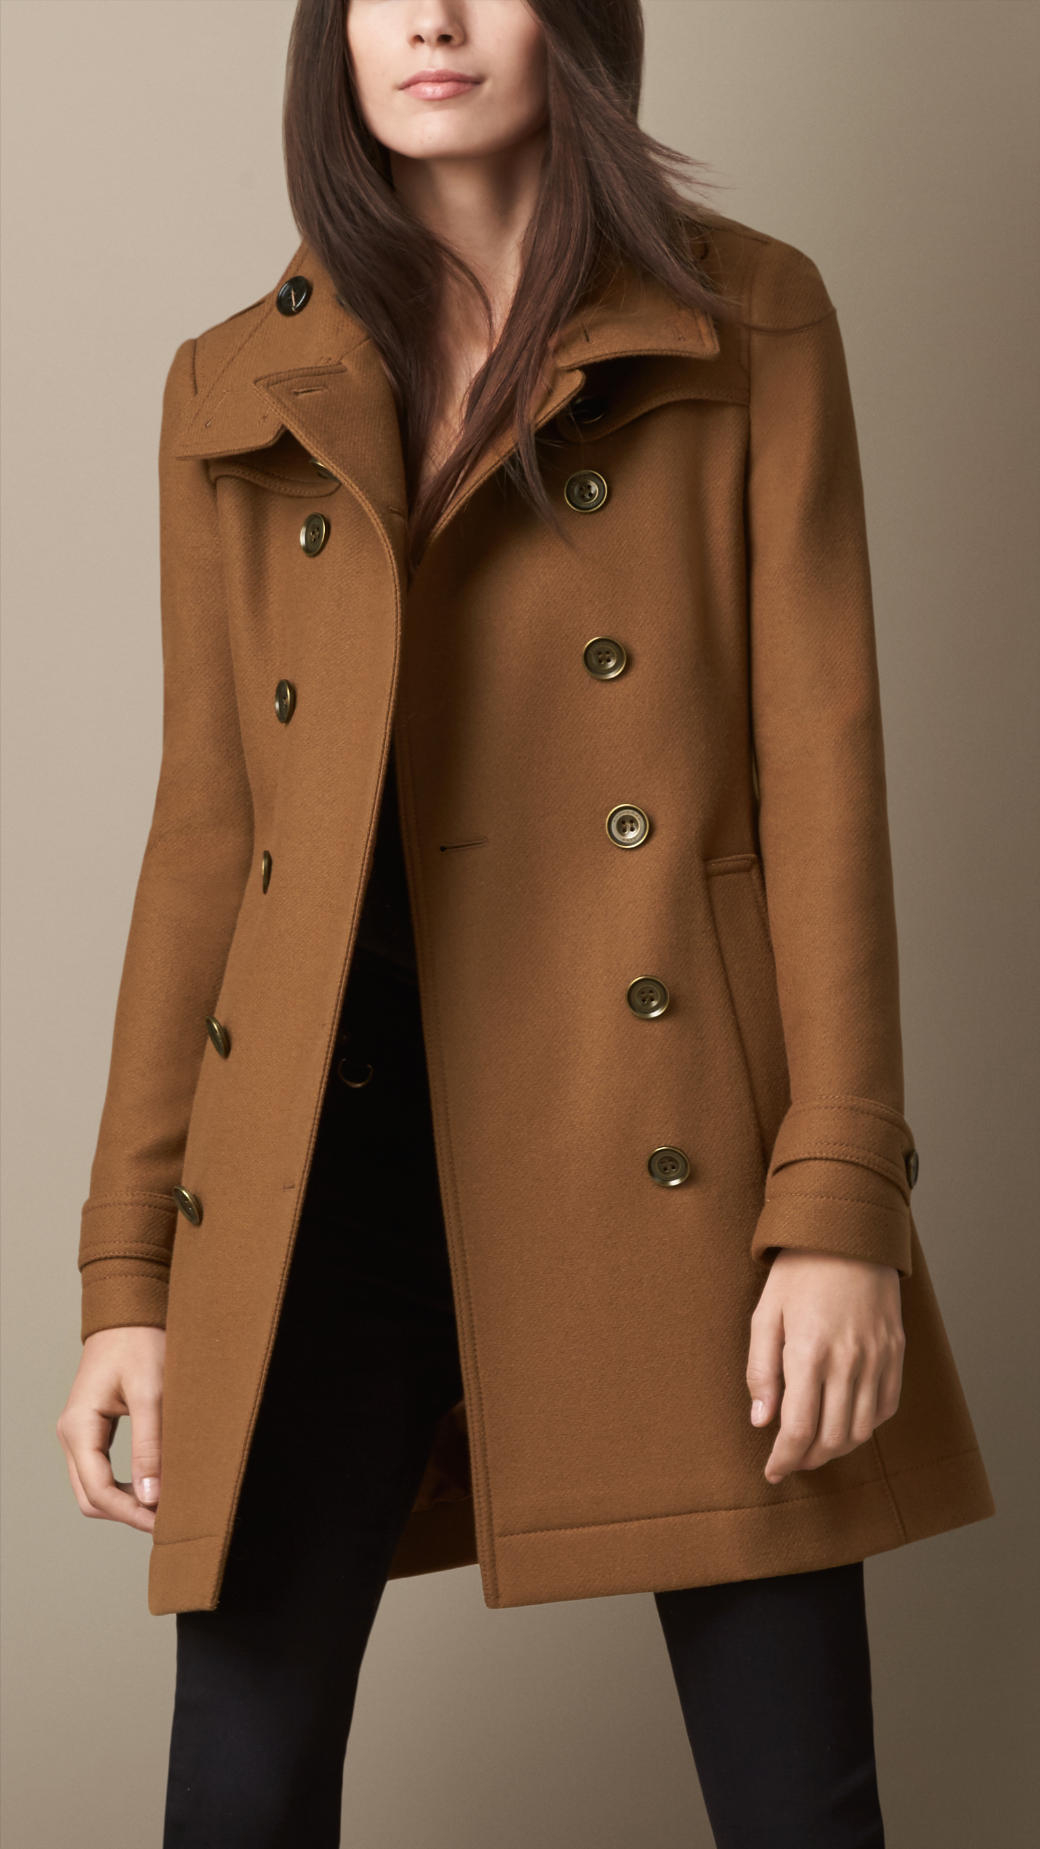 Burberry Short Double Wool Twill Trench Coat in Dark Camel (Brown) - Lyst